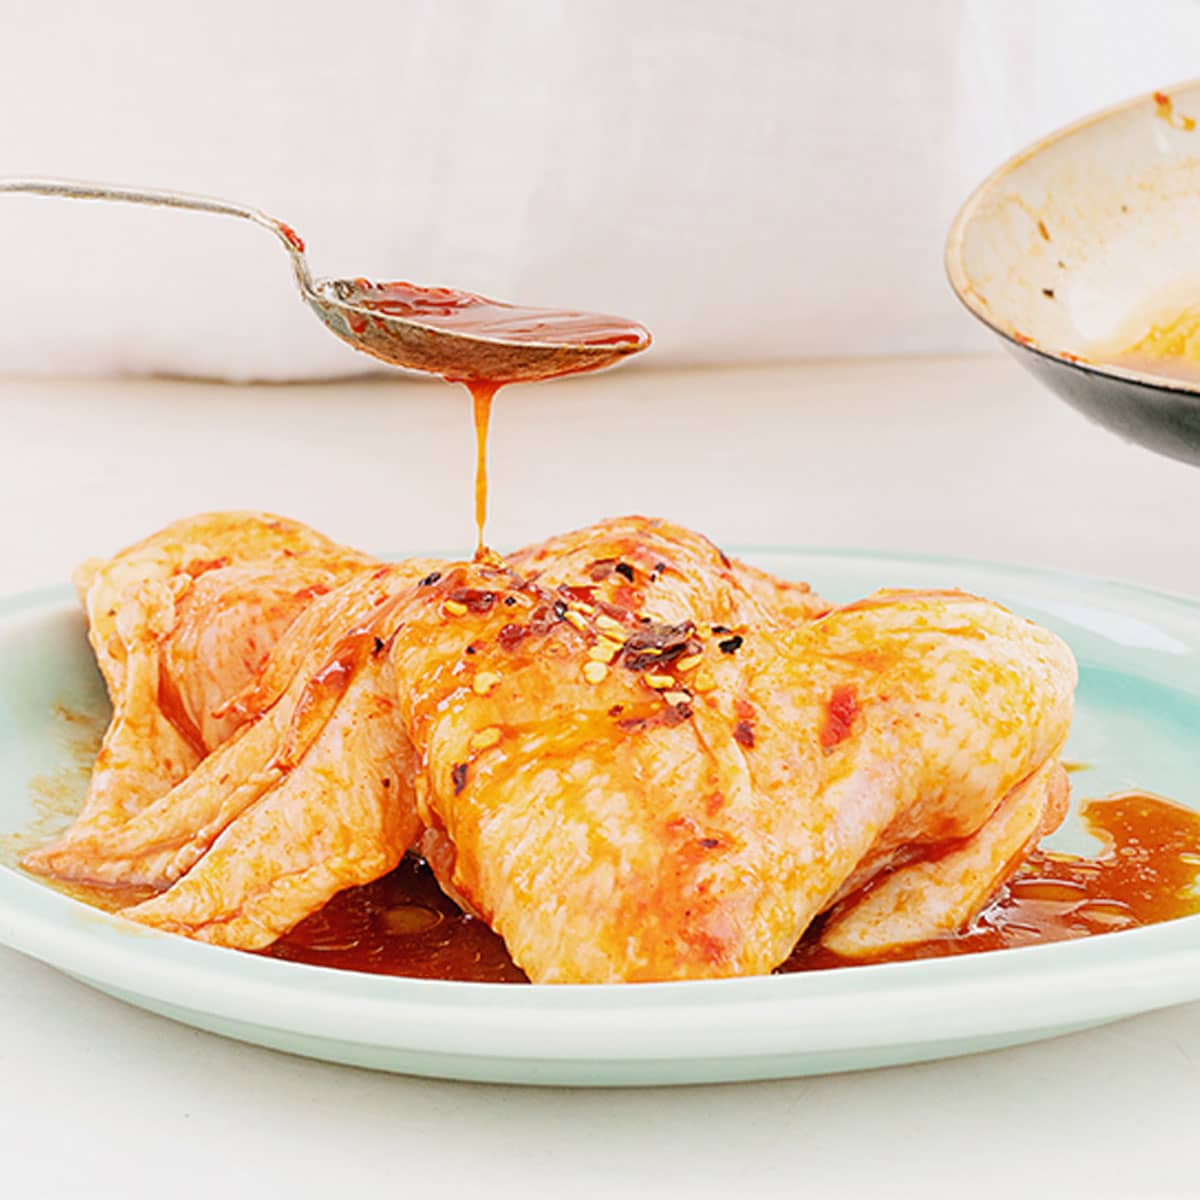 You can over-marinate chicken if you use an acidic marinade containing either citrus juices, vinegar, or wine if you leave it on the chicken for too long before cooking.